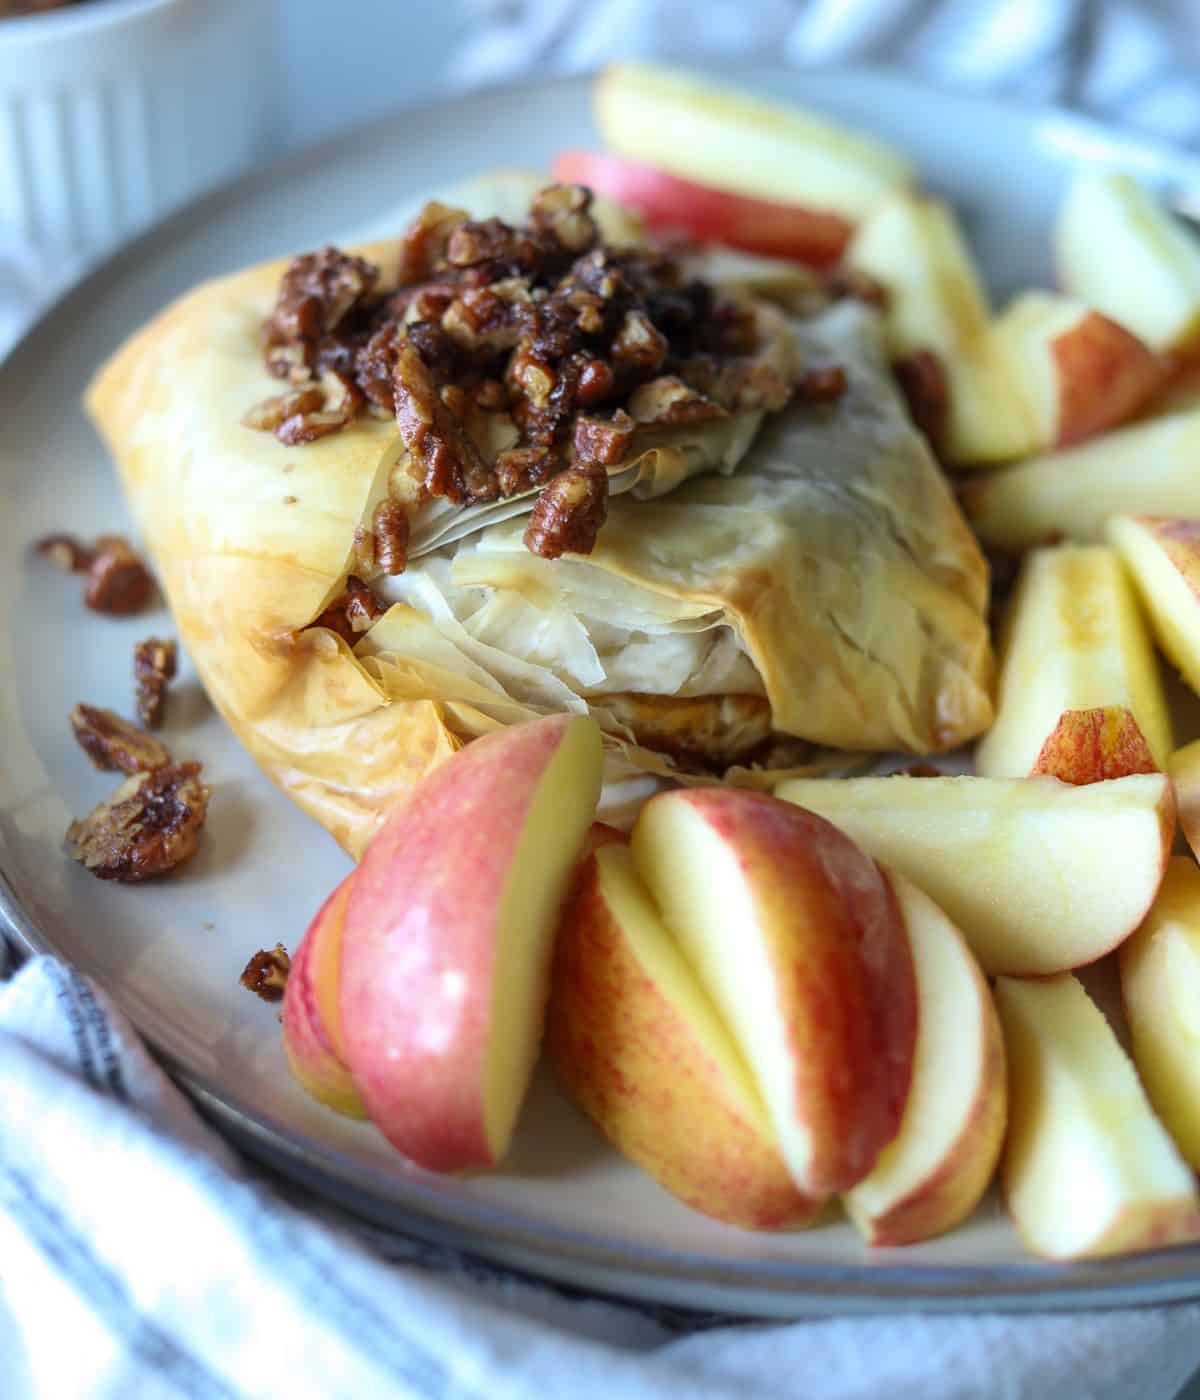 baked brie wrapped in phyllo dough with candied pecans on top with apples on the side